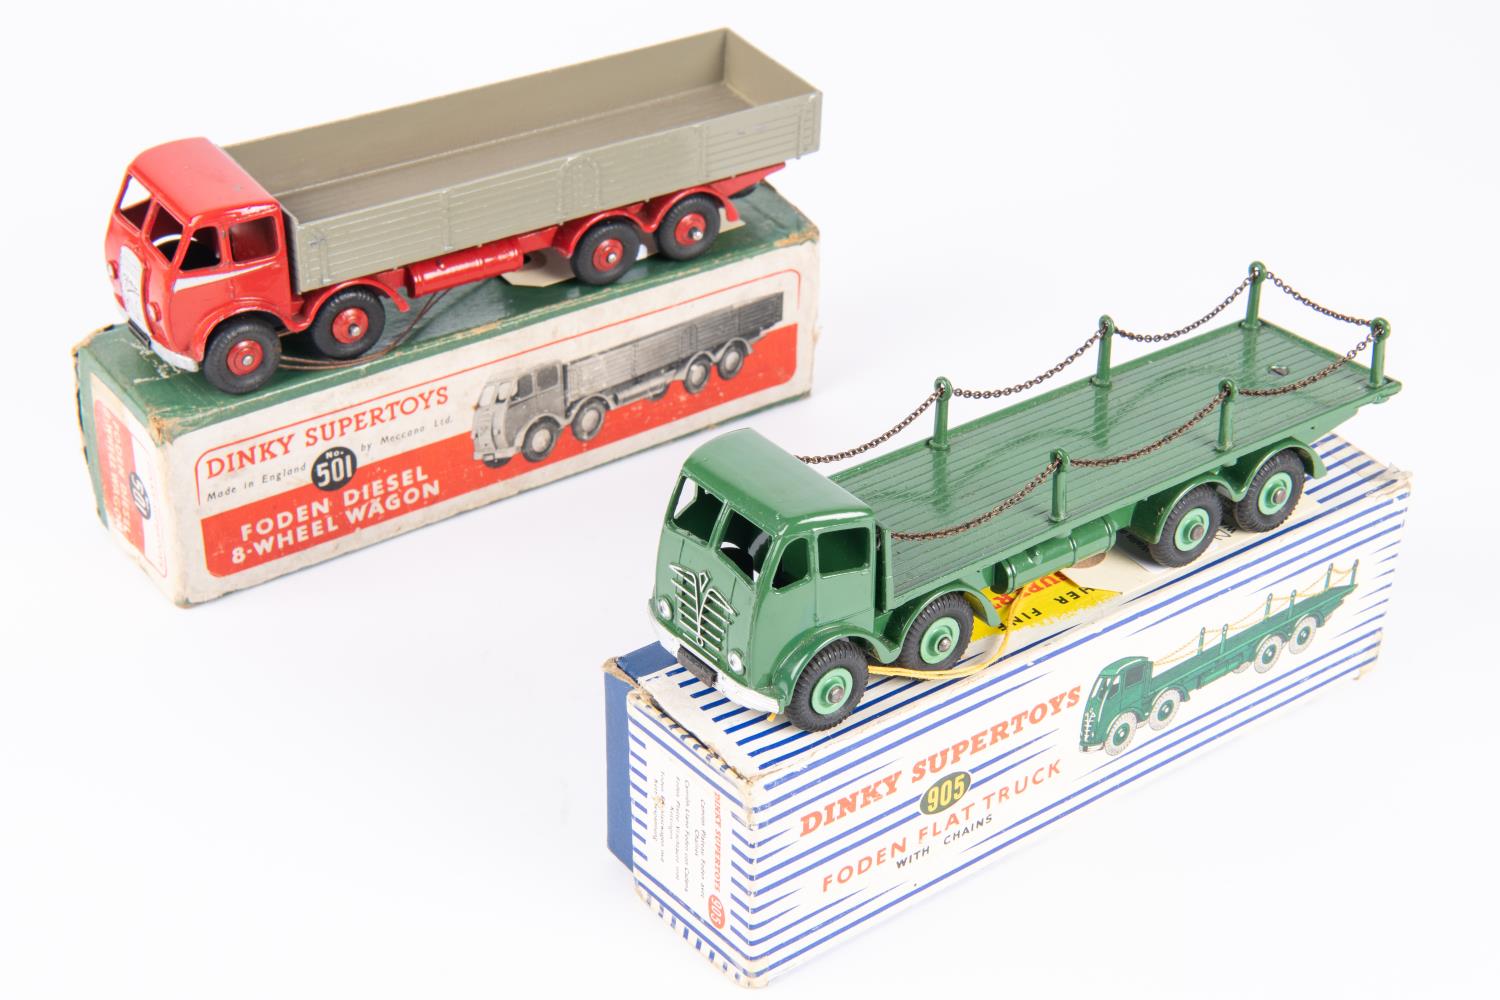 2x Dinky Supertoys Fodens. A Foden DG wagon (501) with red cab, chassis and wheels, grey back and